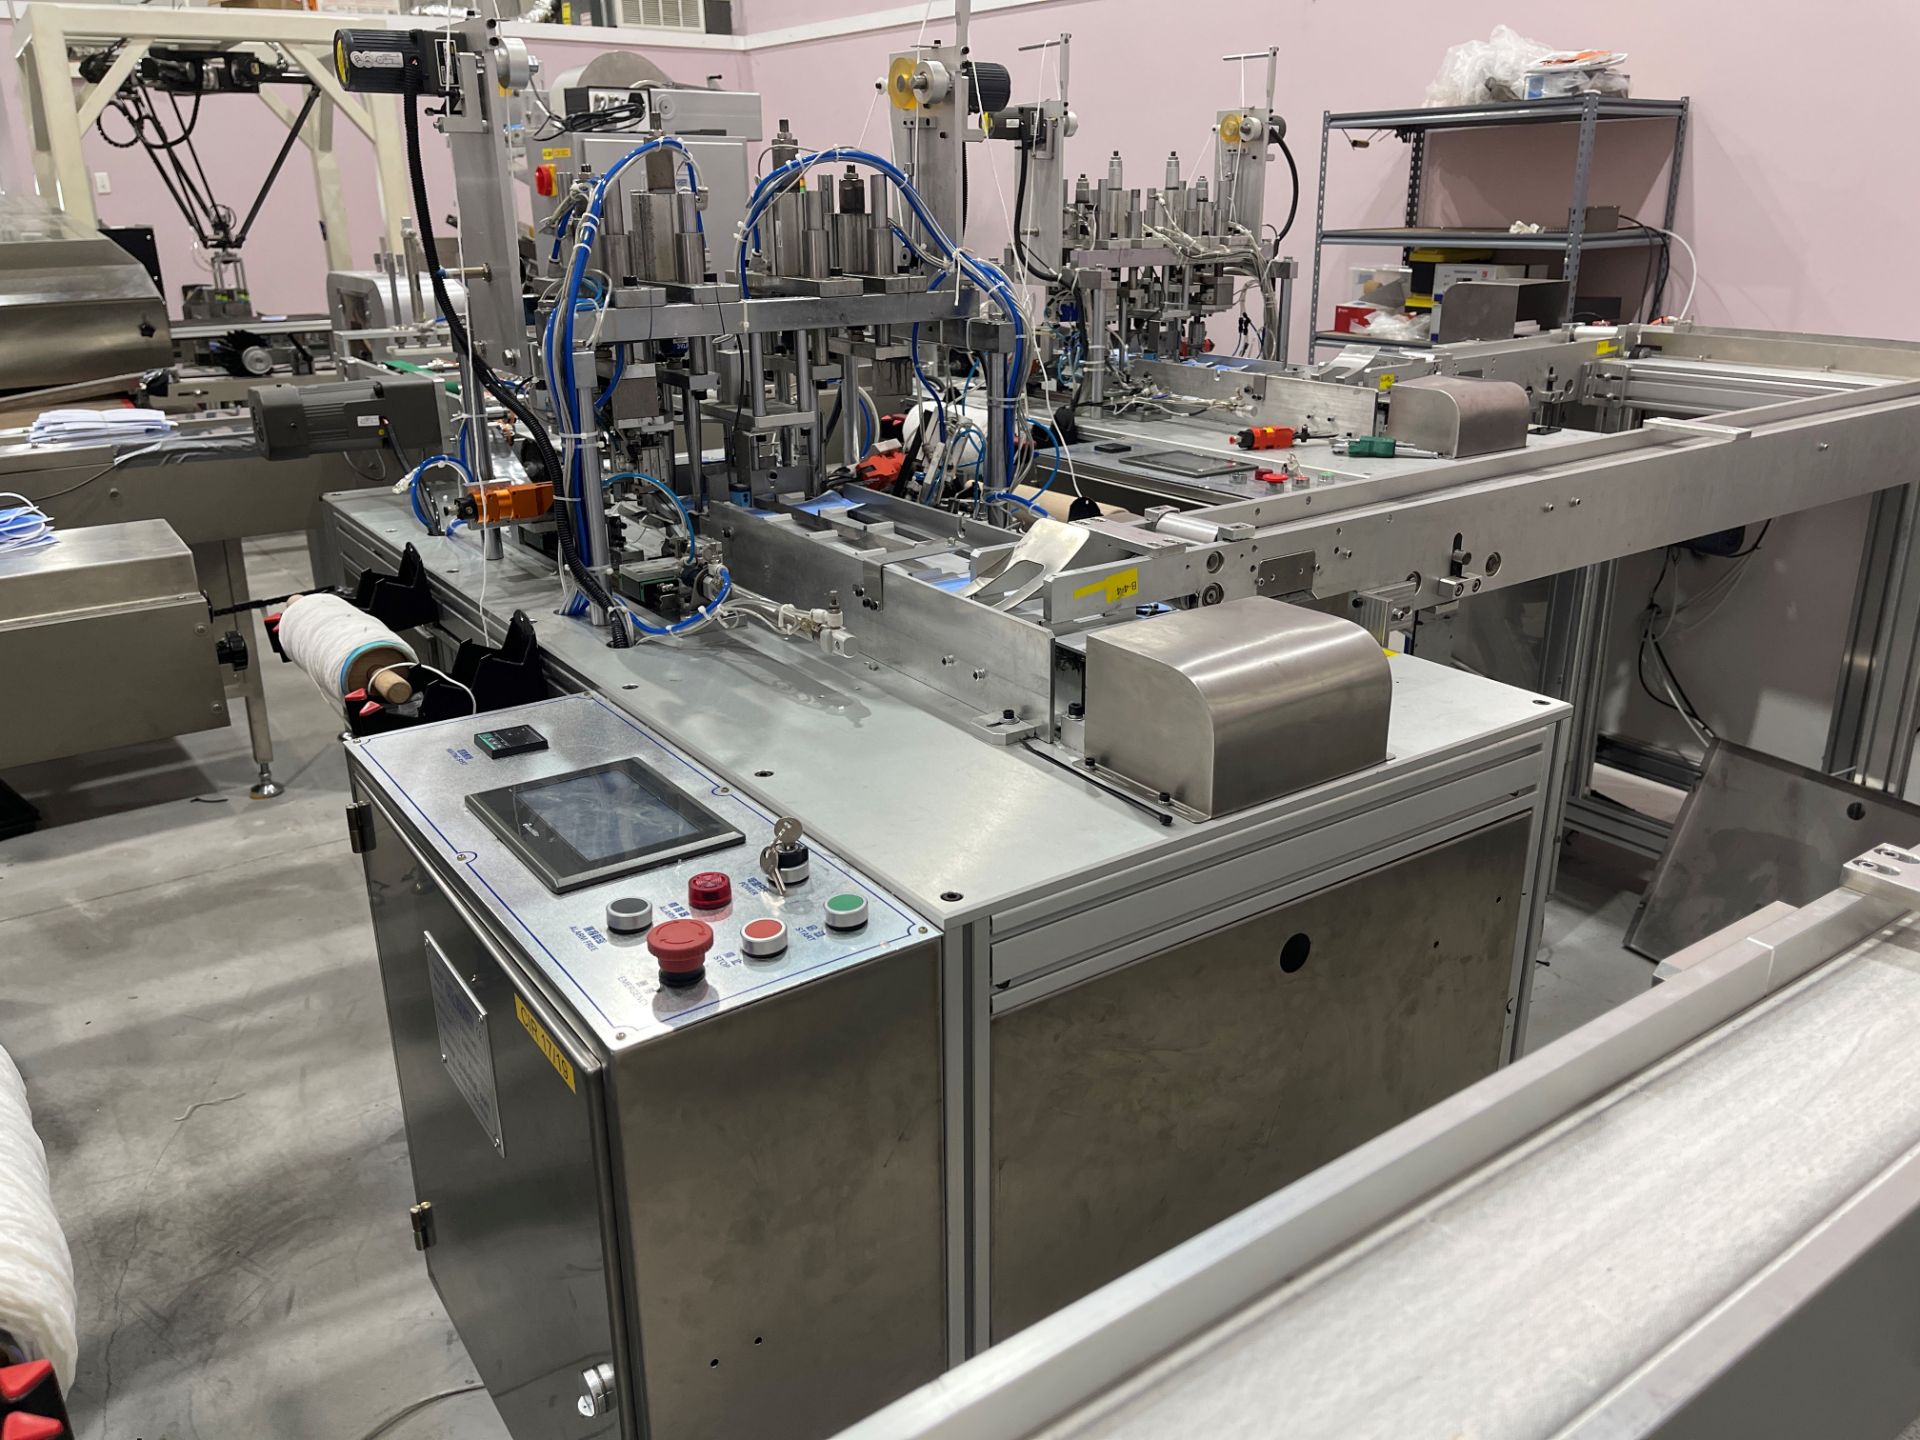 COMPLETE PACKAGE: 2020 3-Ply Disposable Medical Mask Assembly & Packaging Line Equipment, Includes: - Image 11 of 150